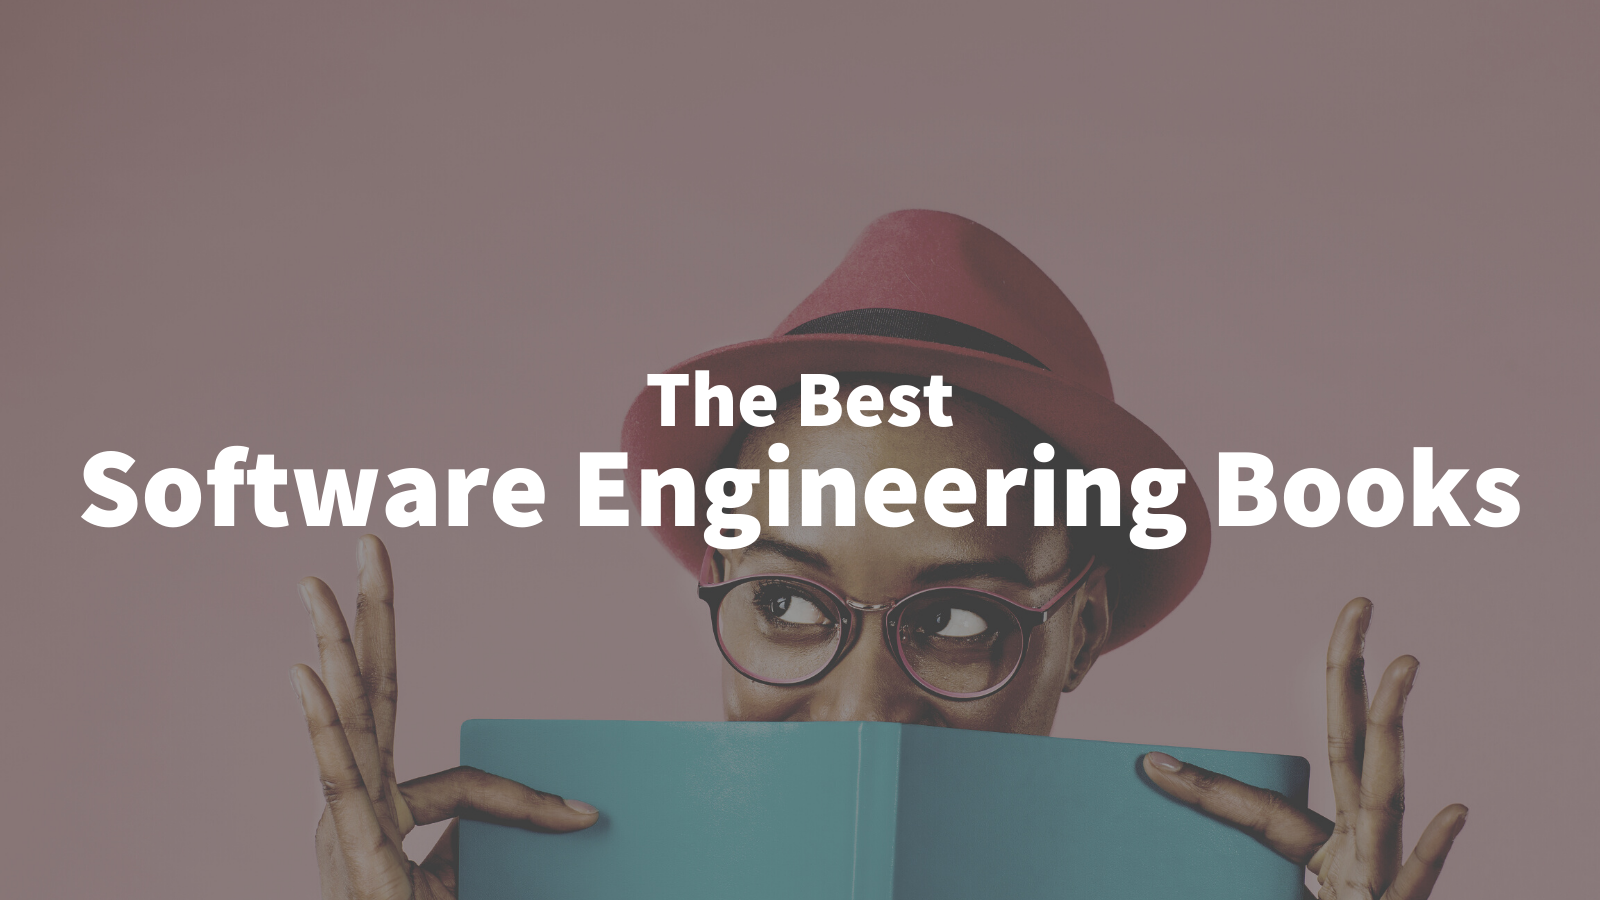 The Best Software Engineering Books